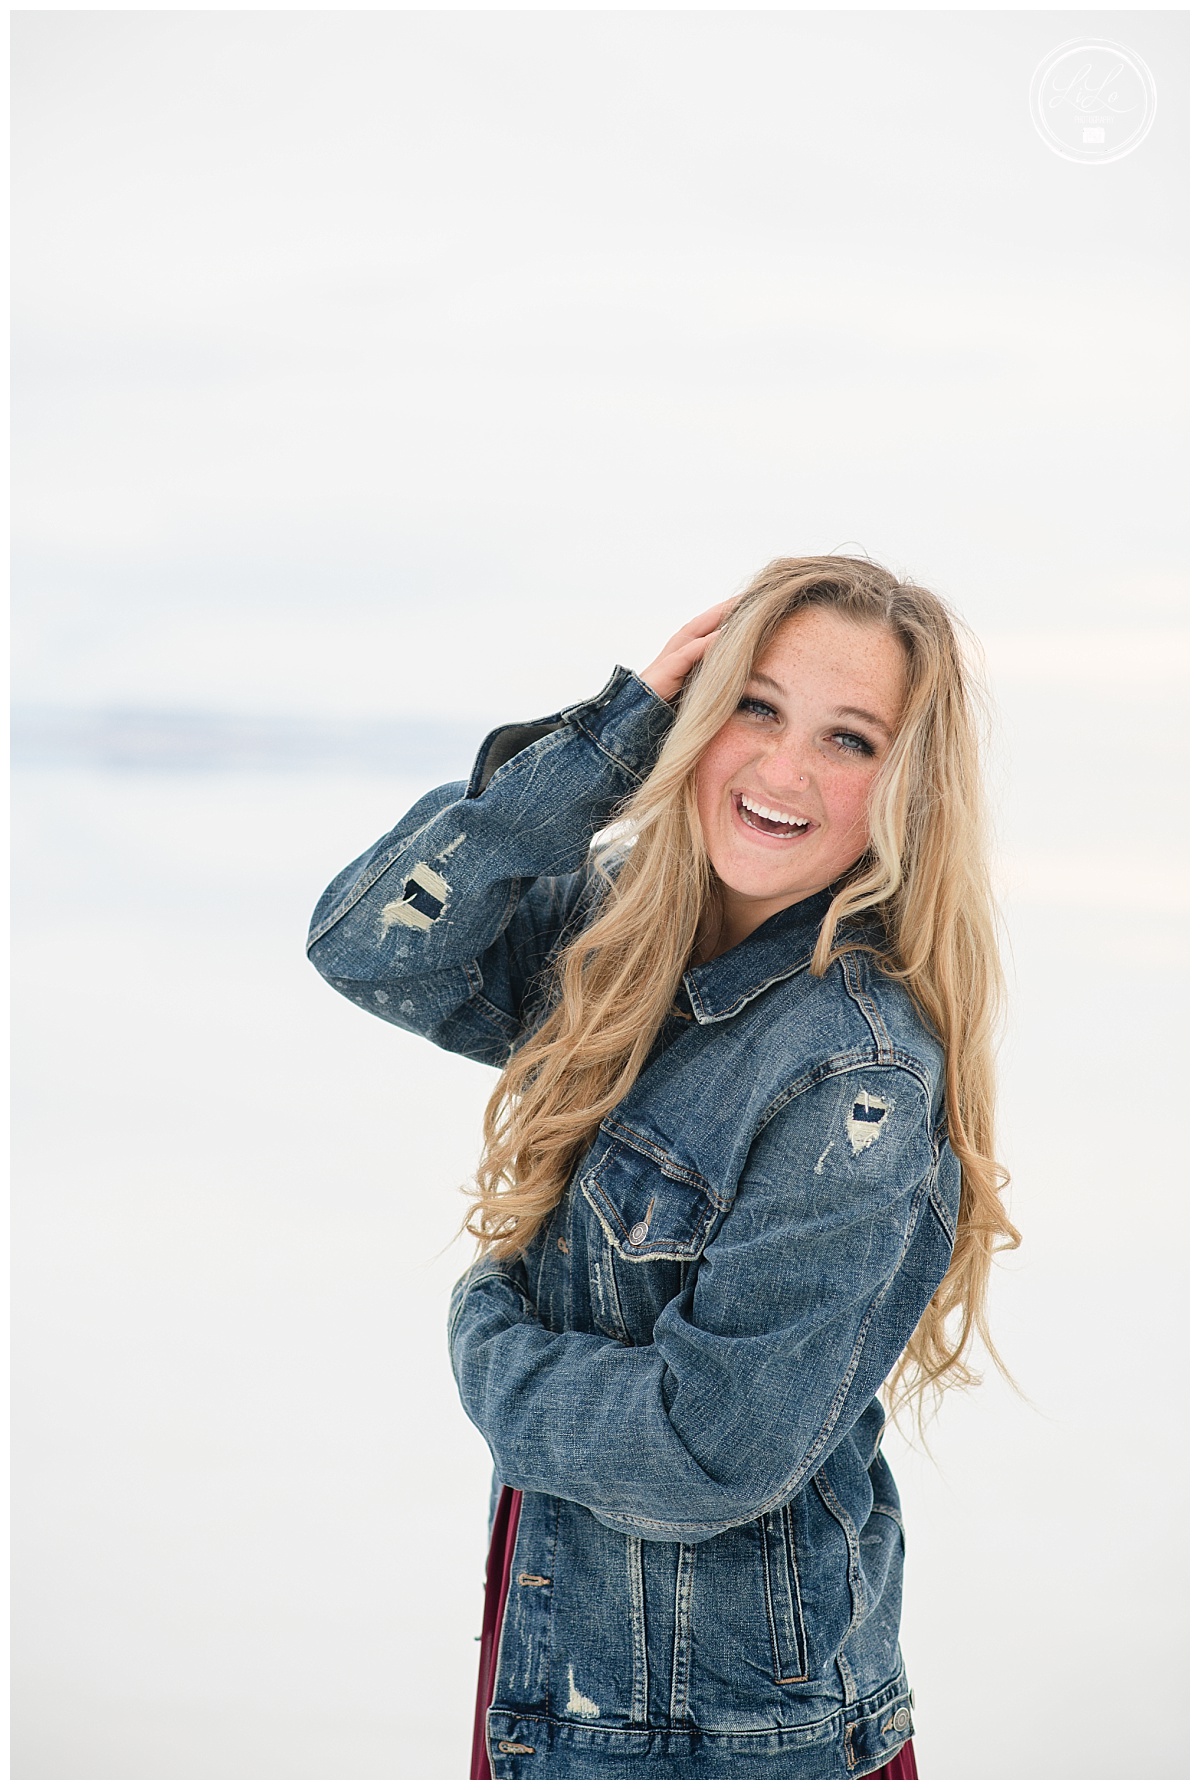 senior picture with girl in a denim jack walking on the salt flats in Utah photographed by Denver senior photographer